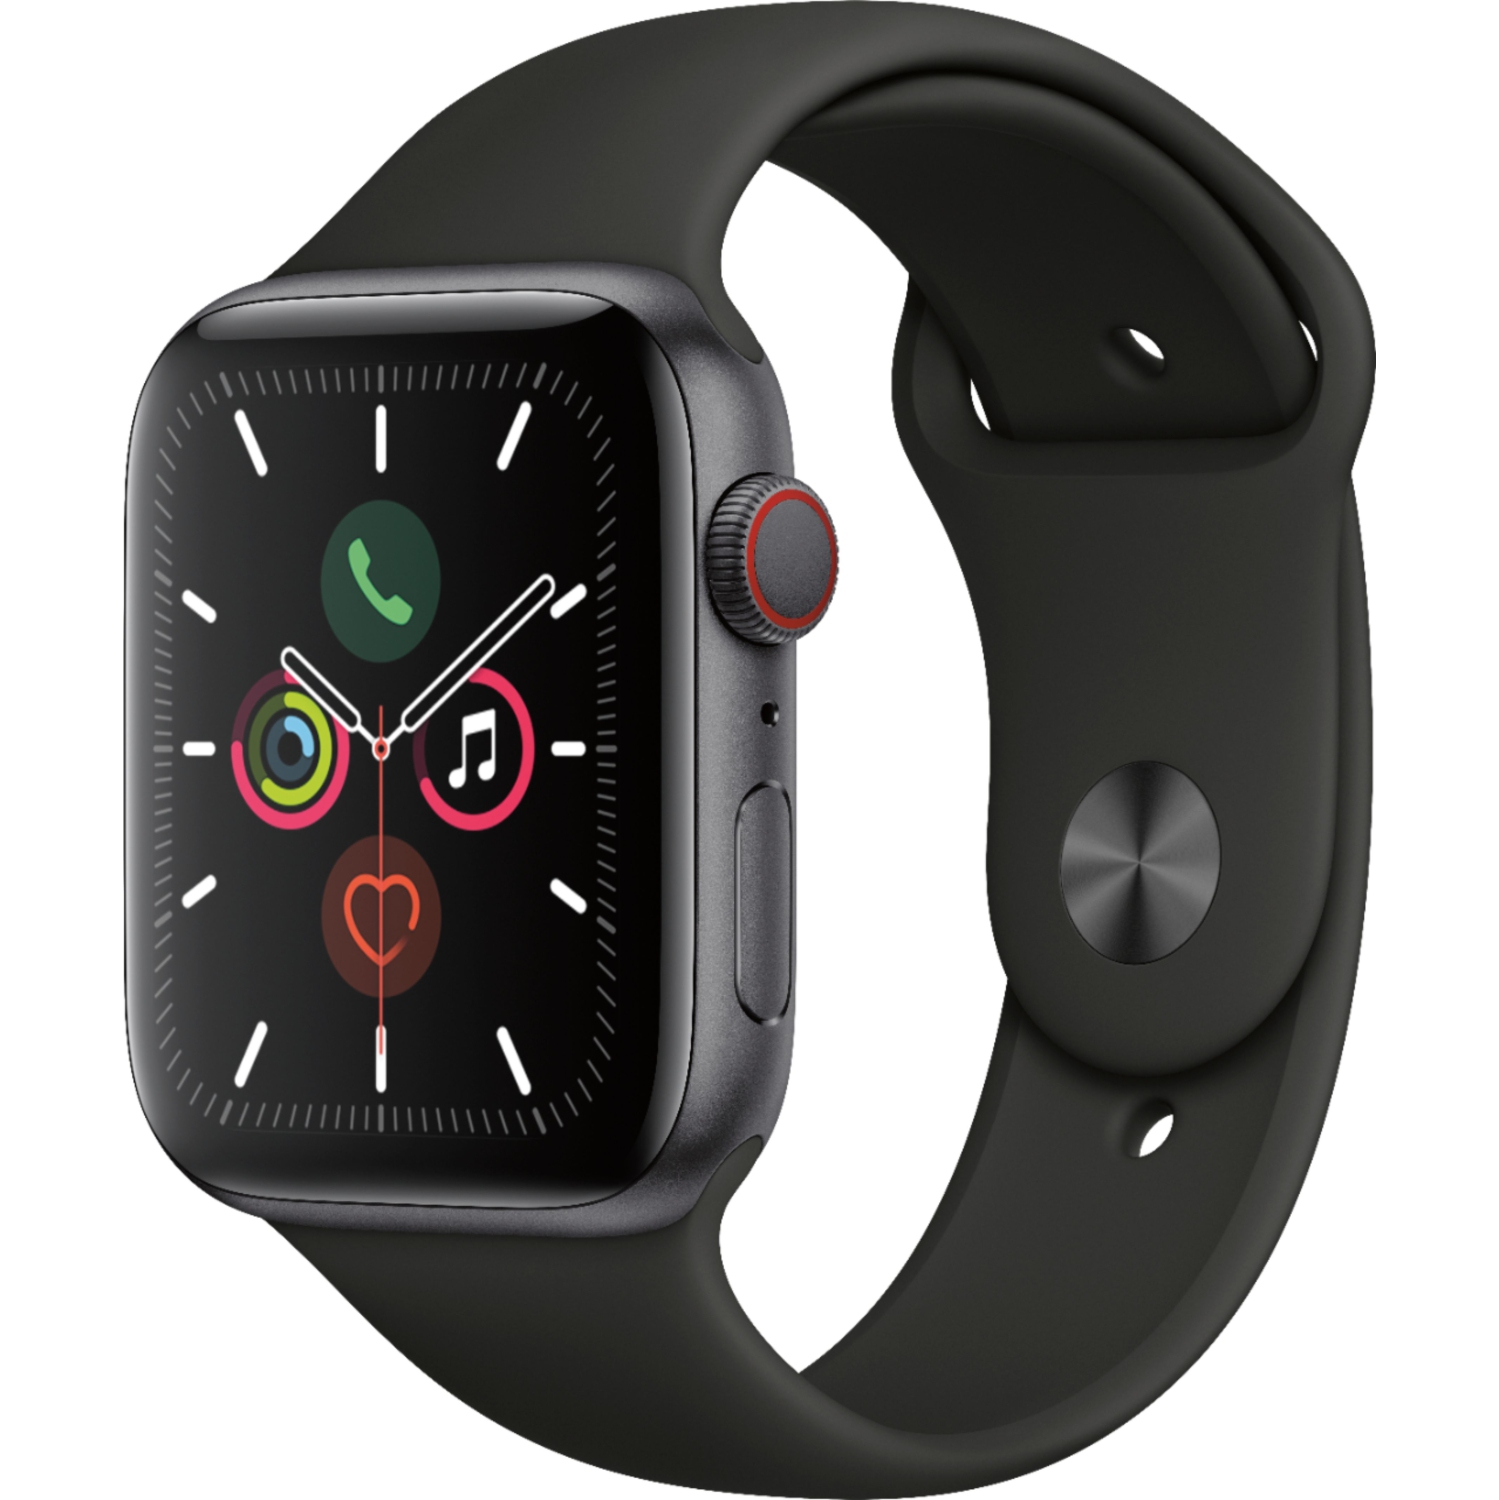 Apple Watch Series 5 (GPS + Cellular) 44mm Space Gray Aluminum 